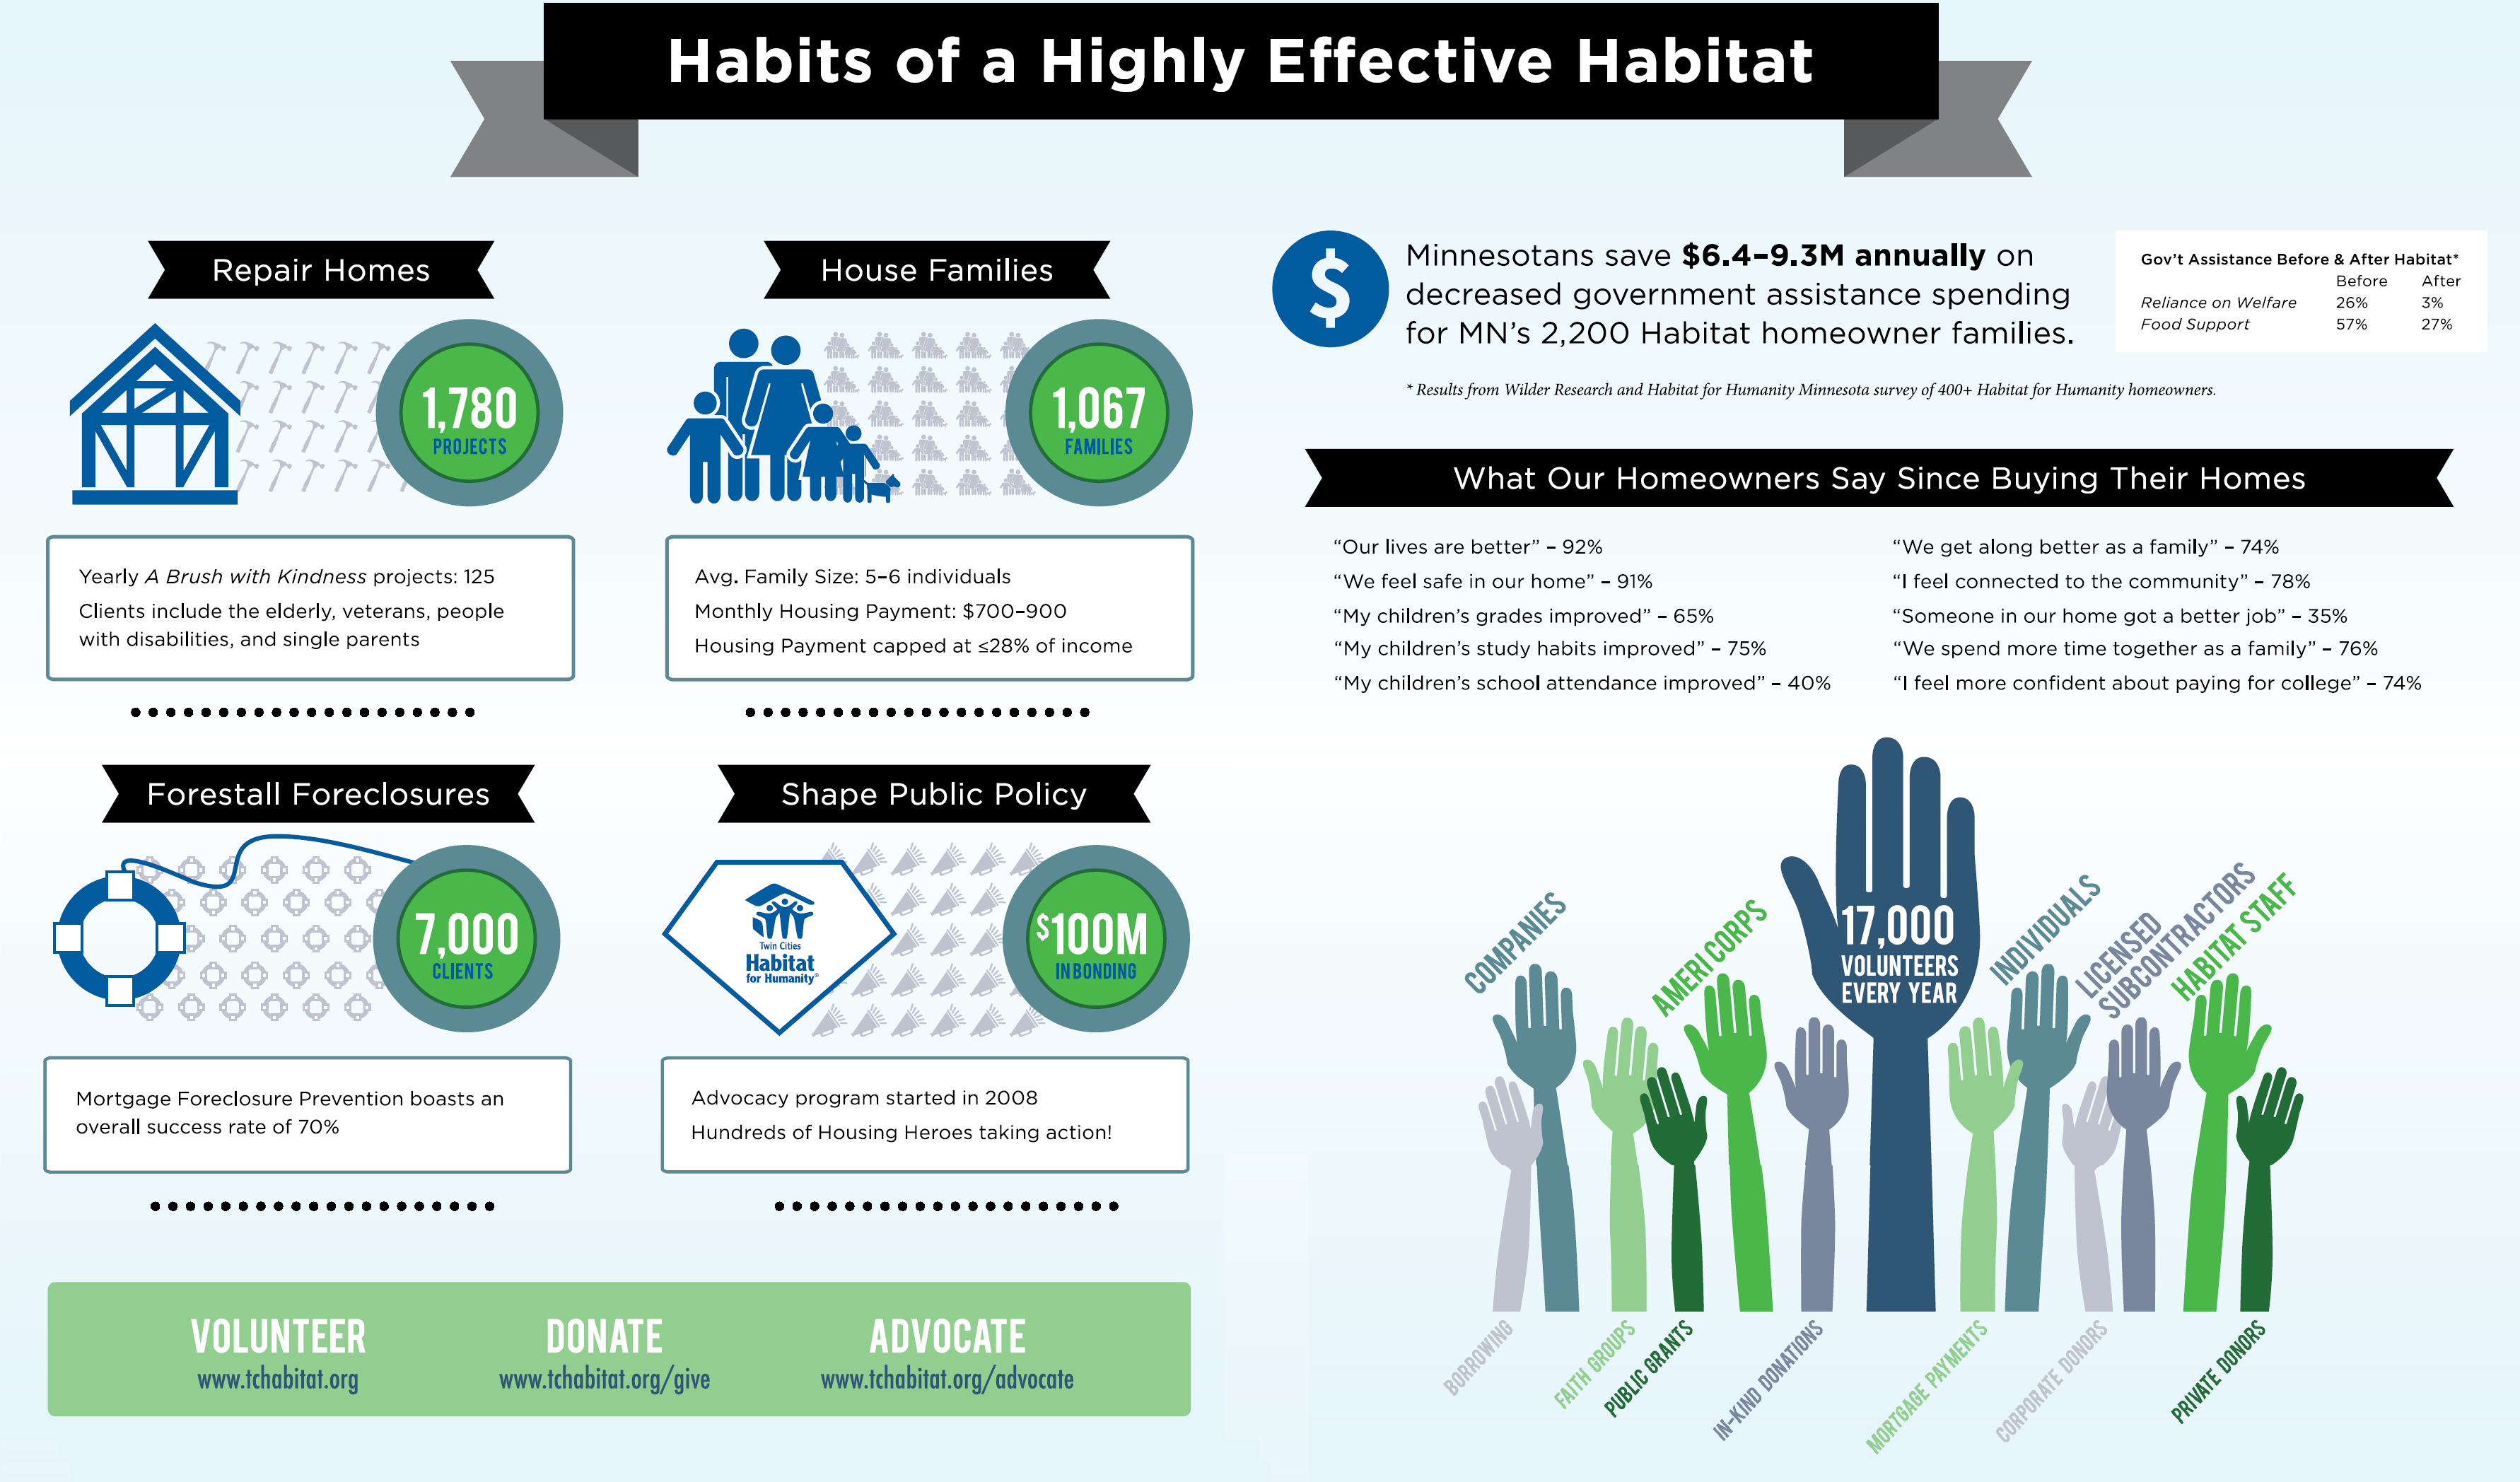 [Infographic] 30 years of Twin Cities Habitat for Humanity